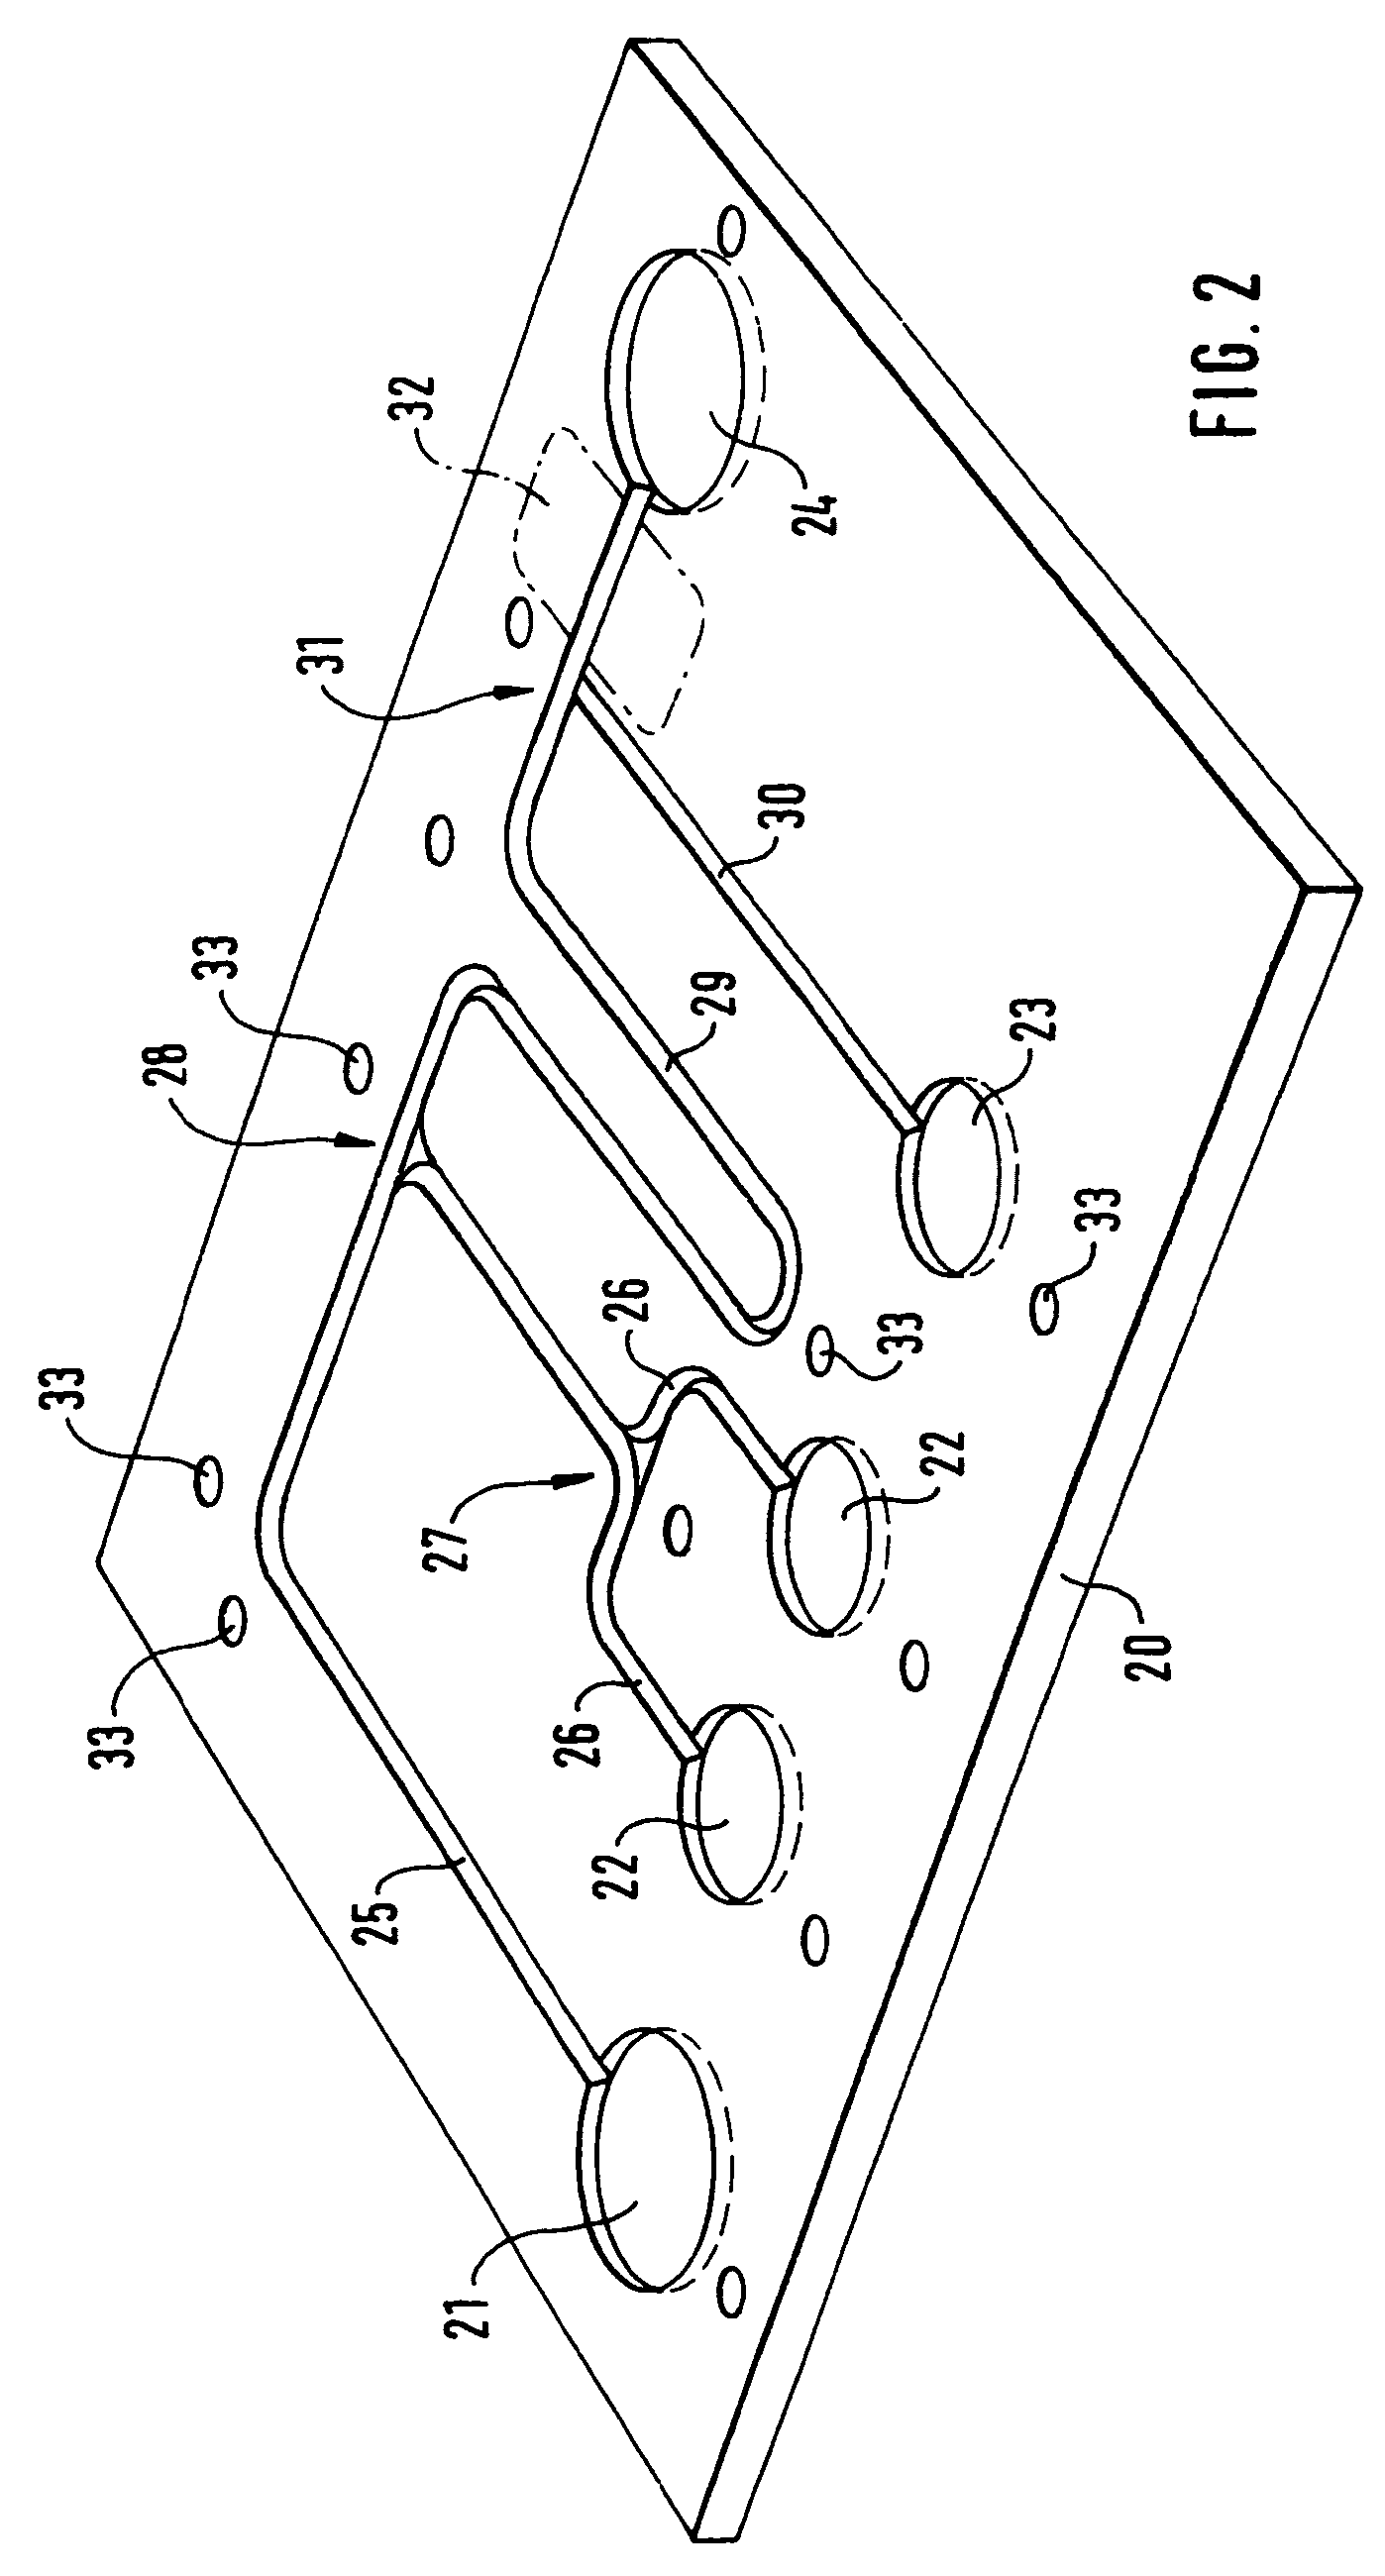 Apparatus for the operation of a microfluidic device